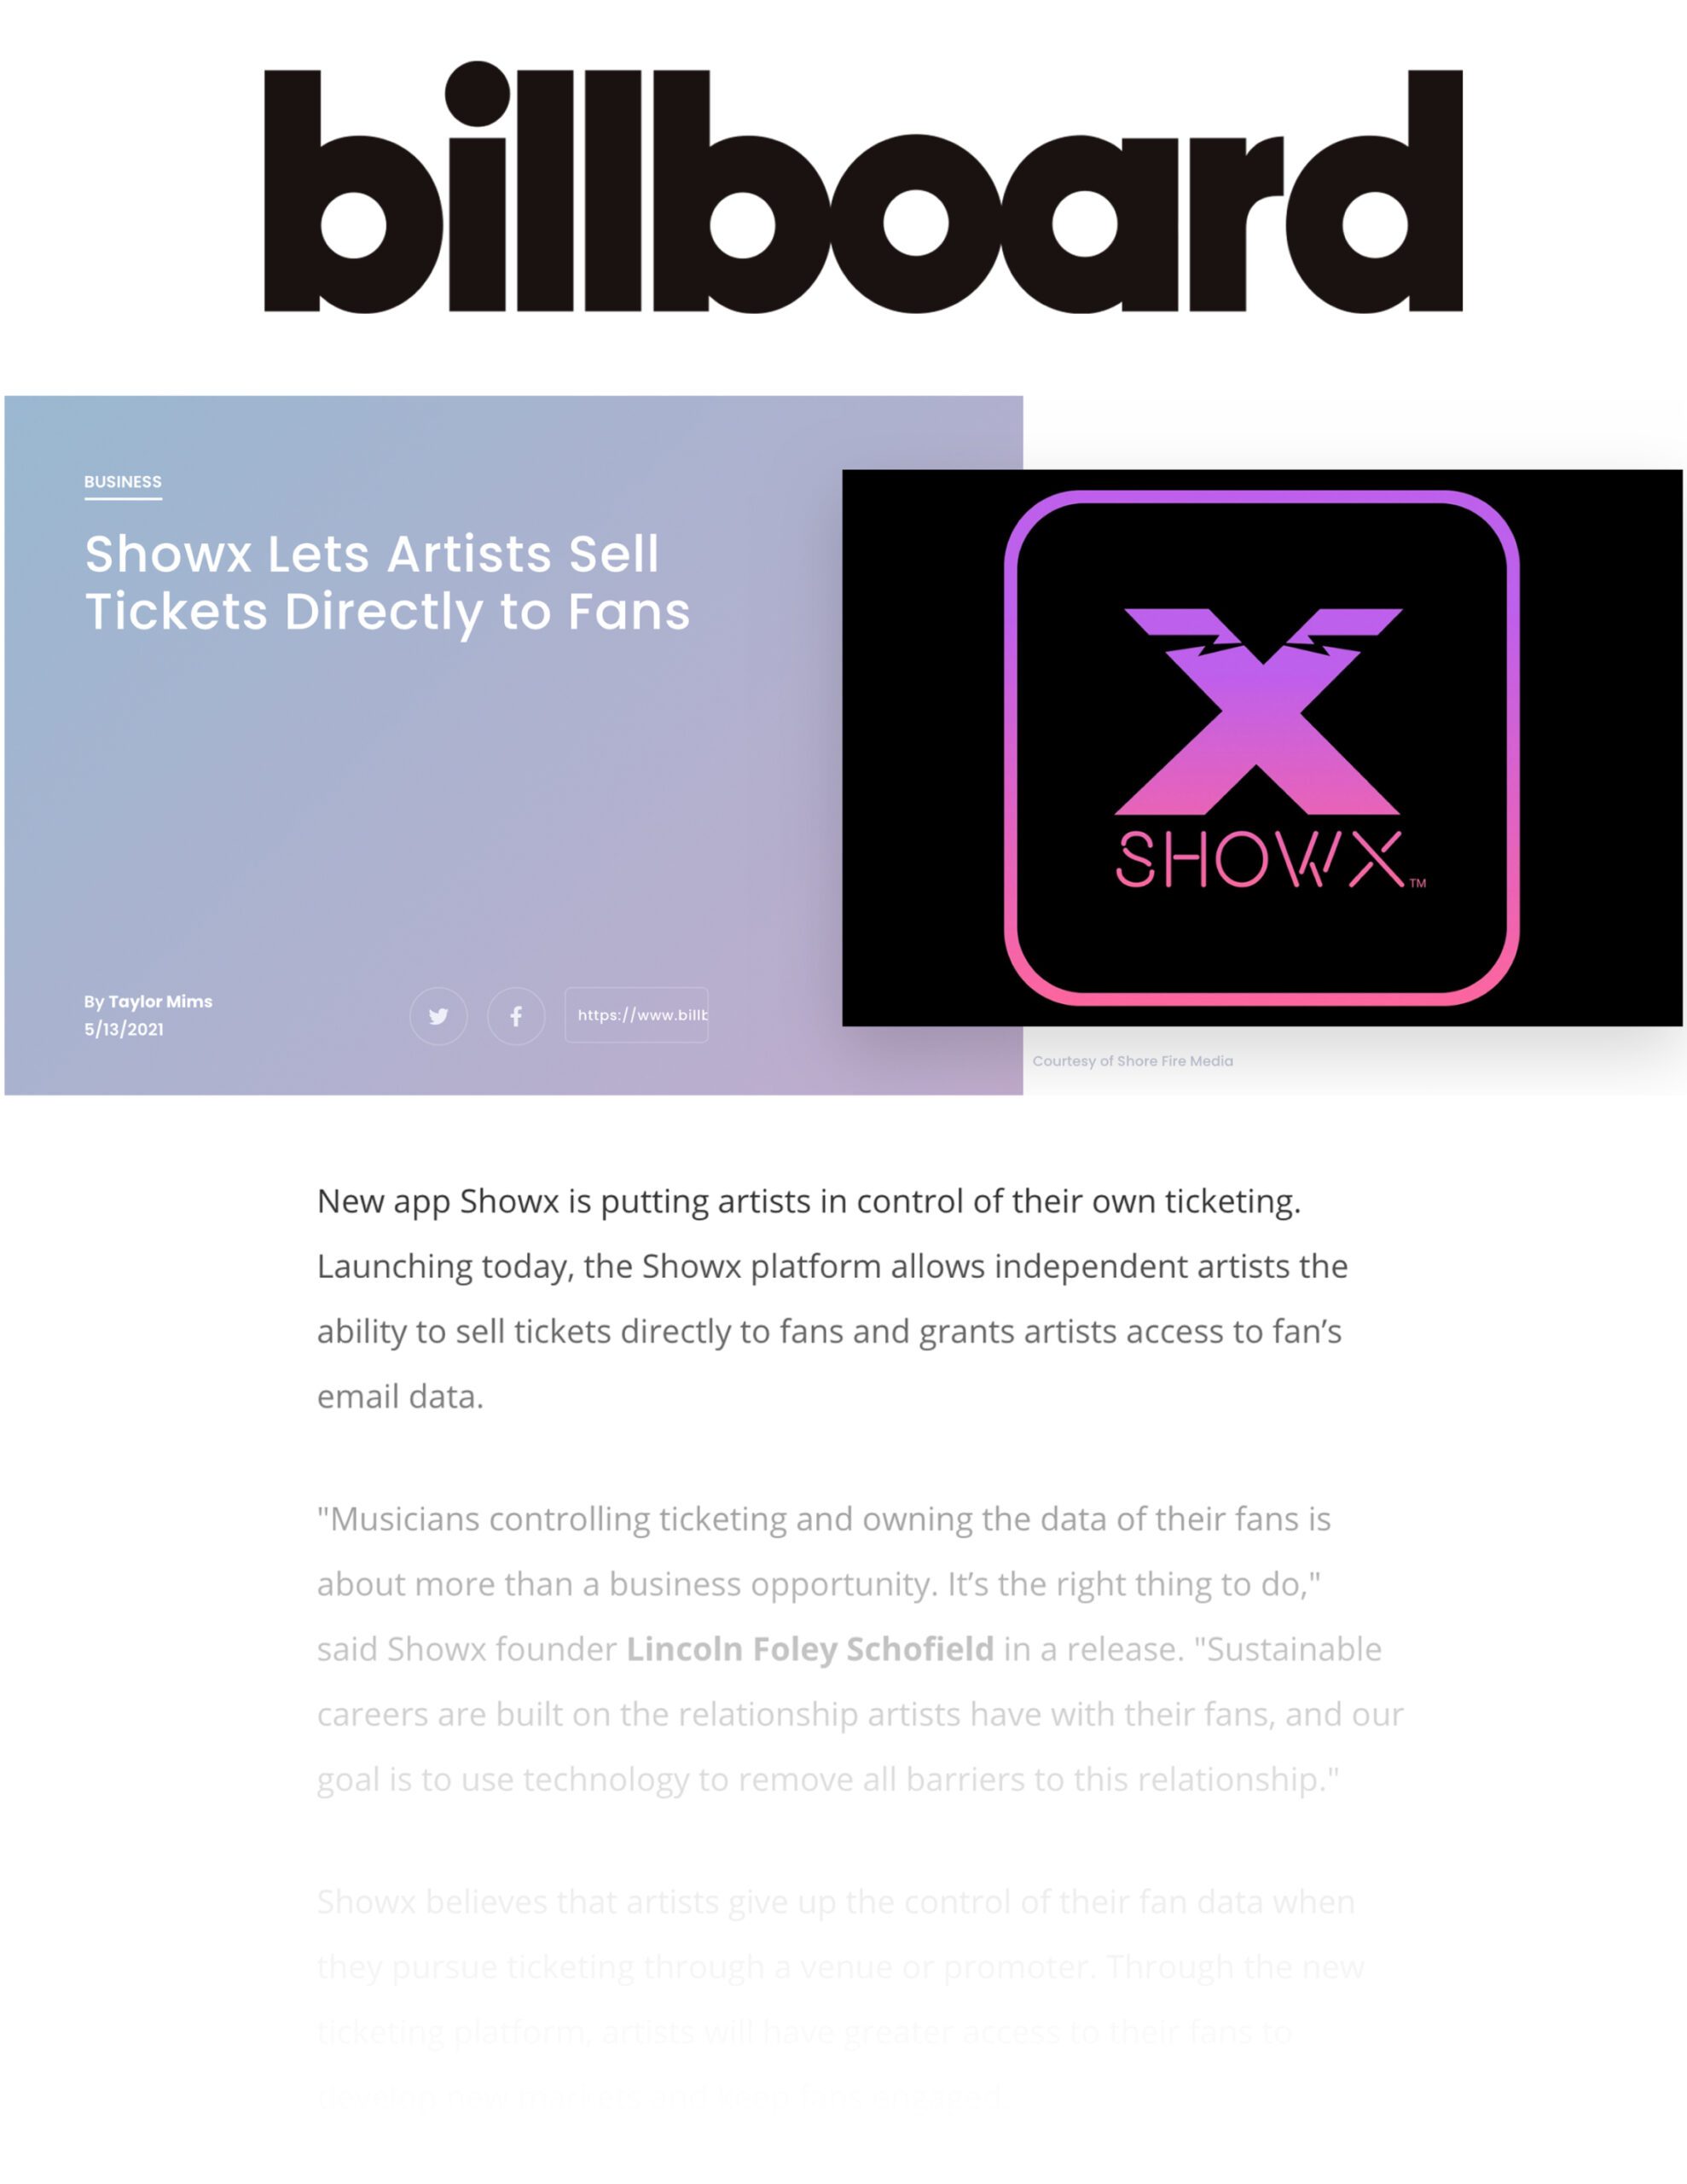 PR 1 billboard_Showx Lets Artists Sell Tickets Directly to Fans